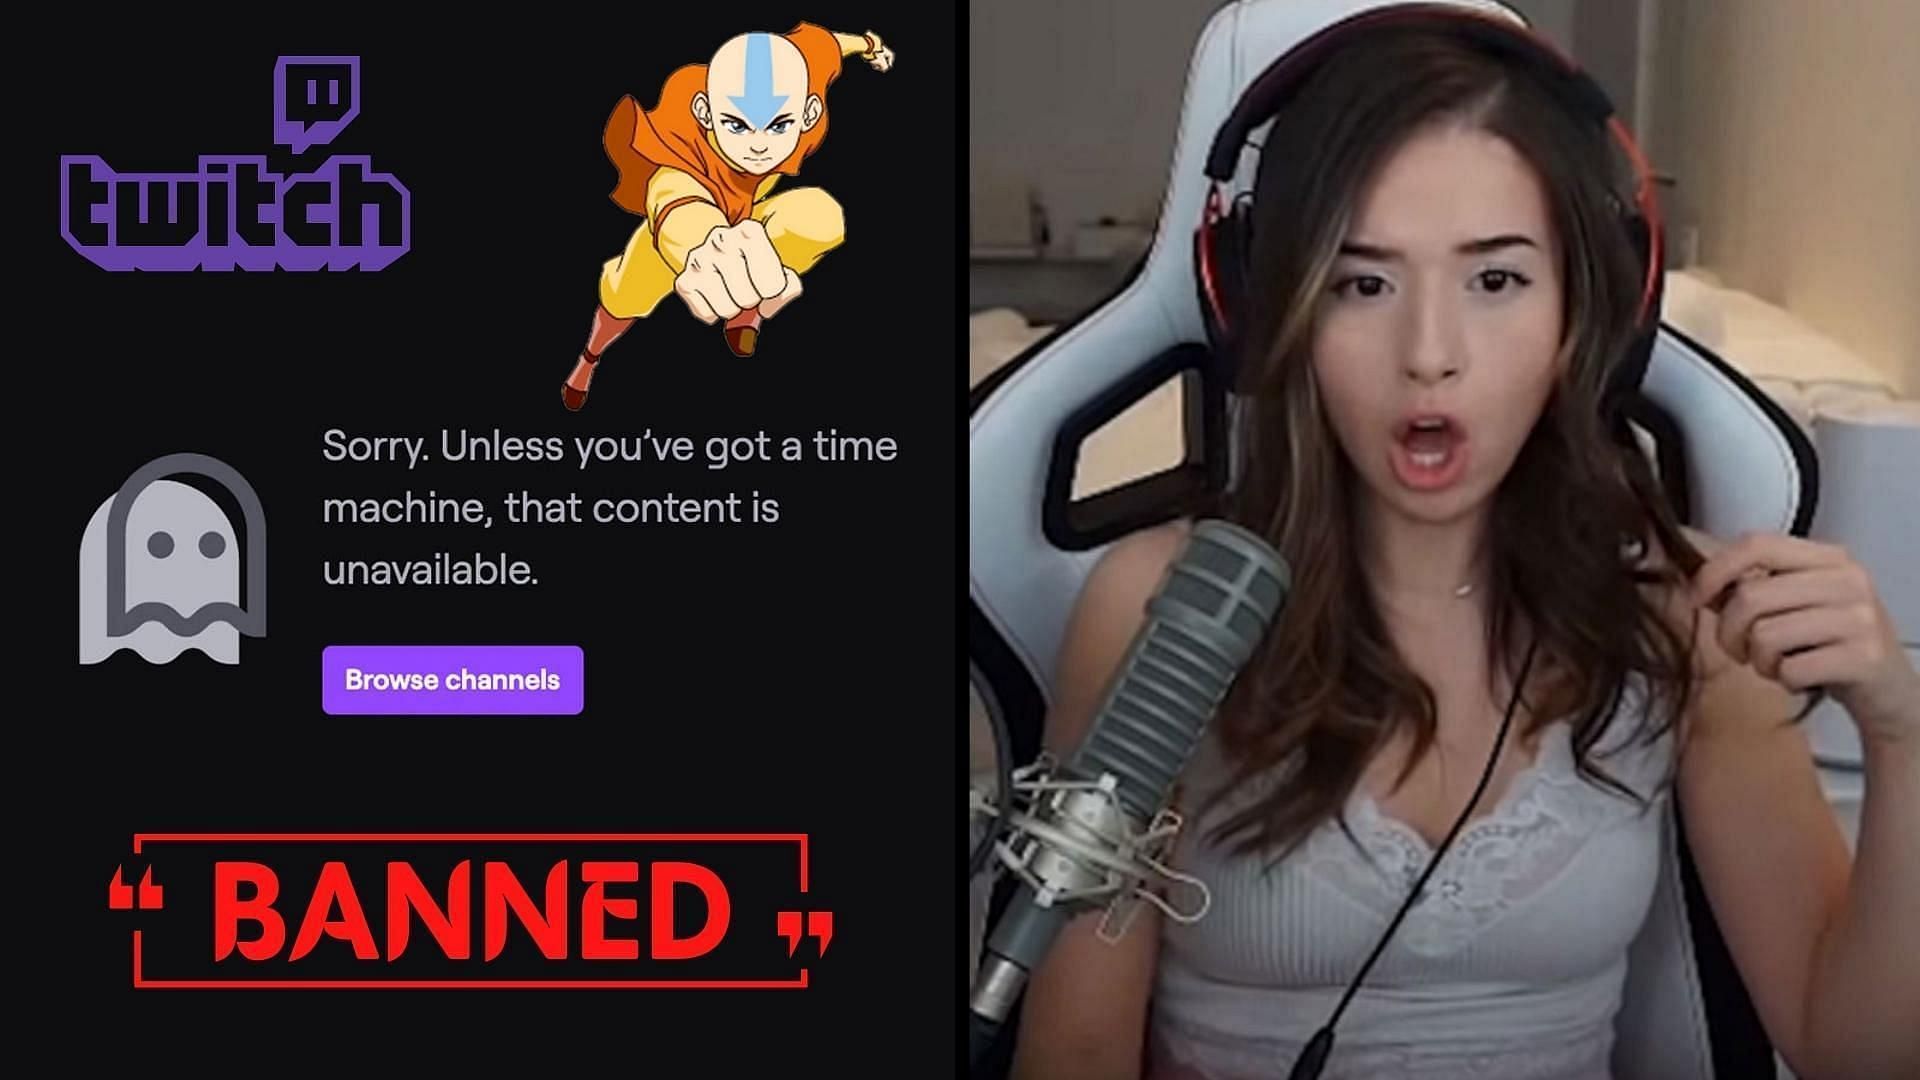 Fans are divided about whether Pokimane&#039;s Twitch ban was justified or not (Image via Sportskeeda)